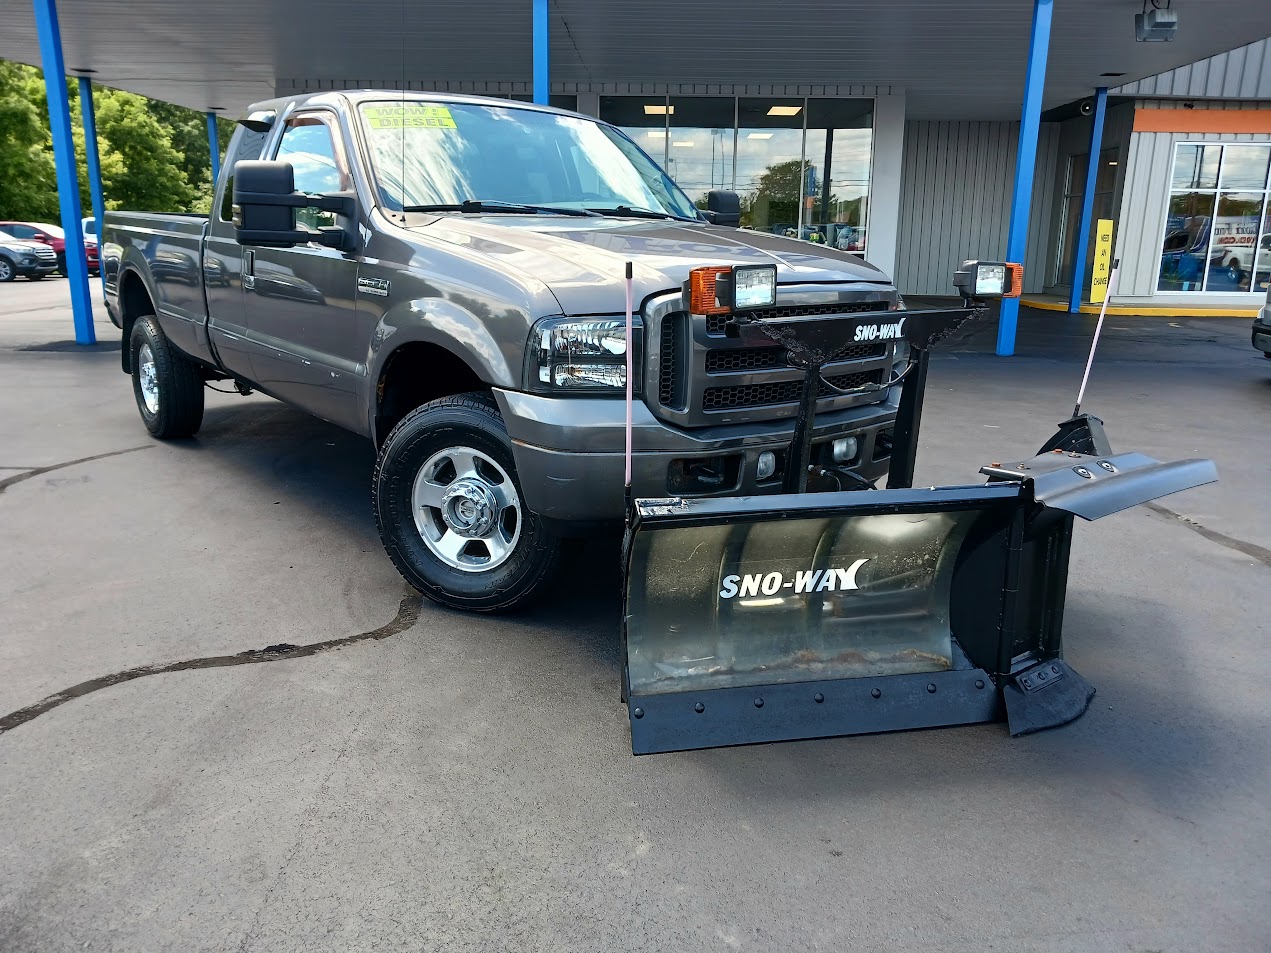 Used 2005 Ford F-350 Super Duty Lariat with VIN 1FTWX31P95EC34523 for sale in Albion, MI